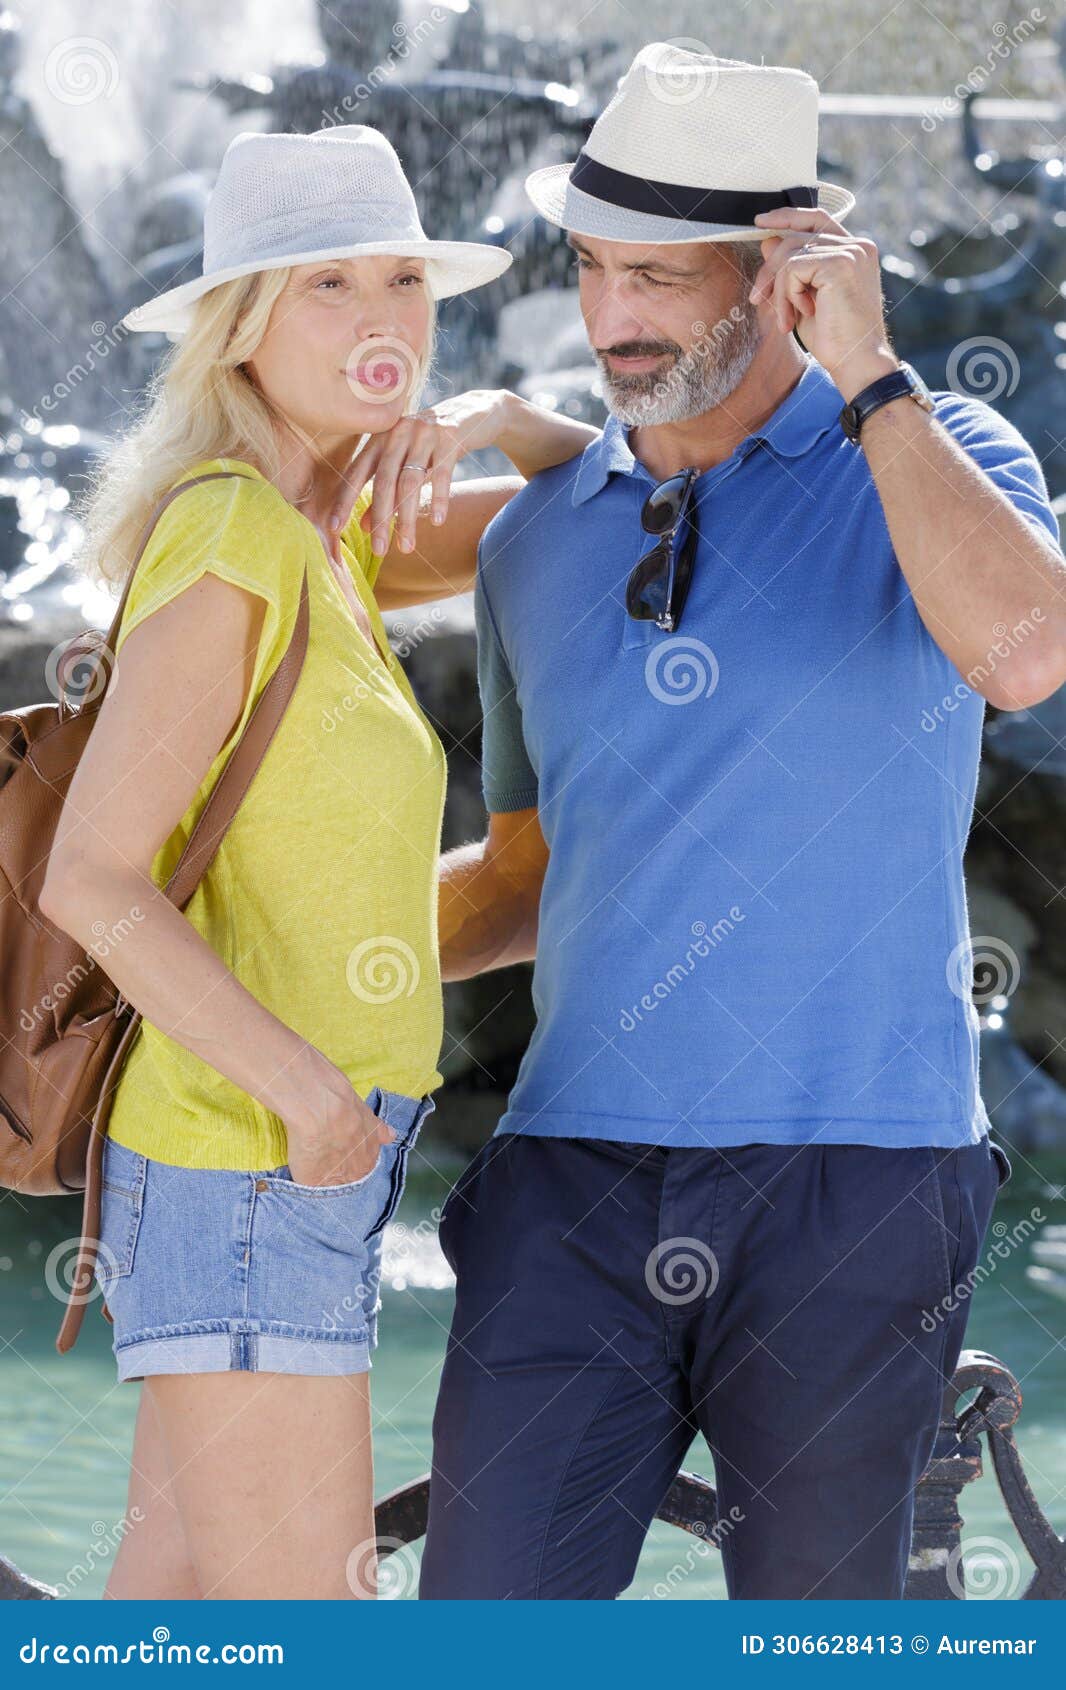 middle-aged couple during city break